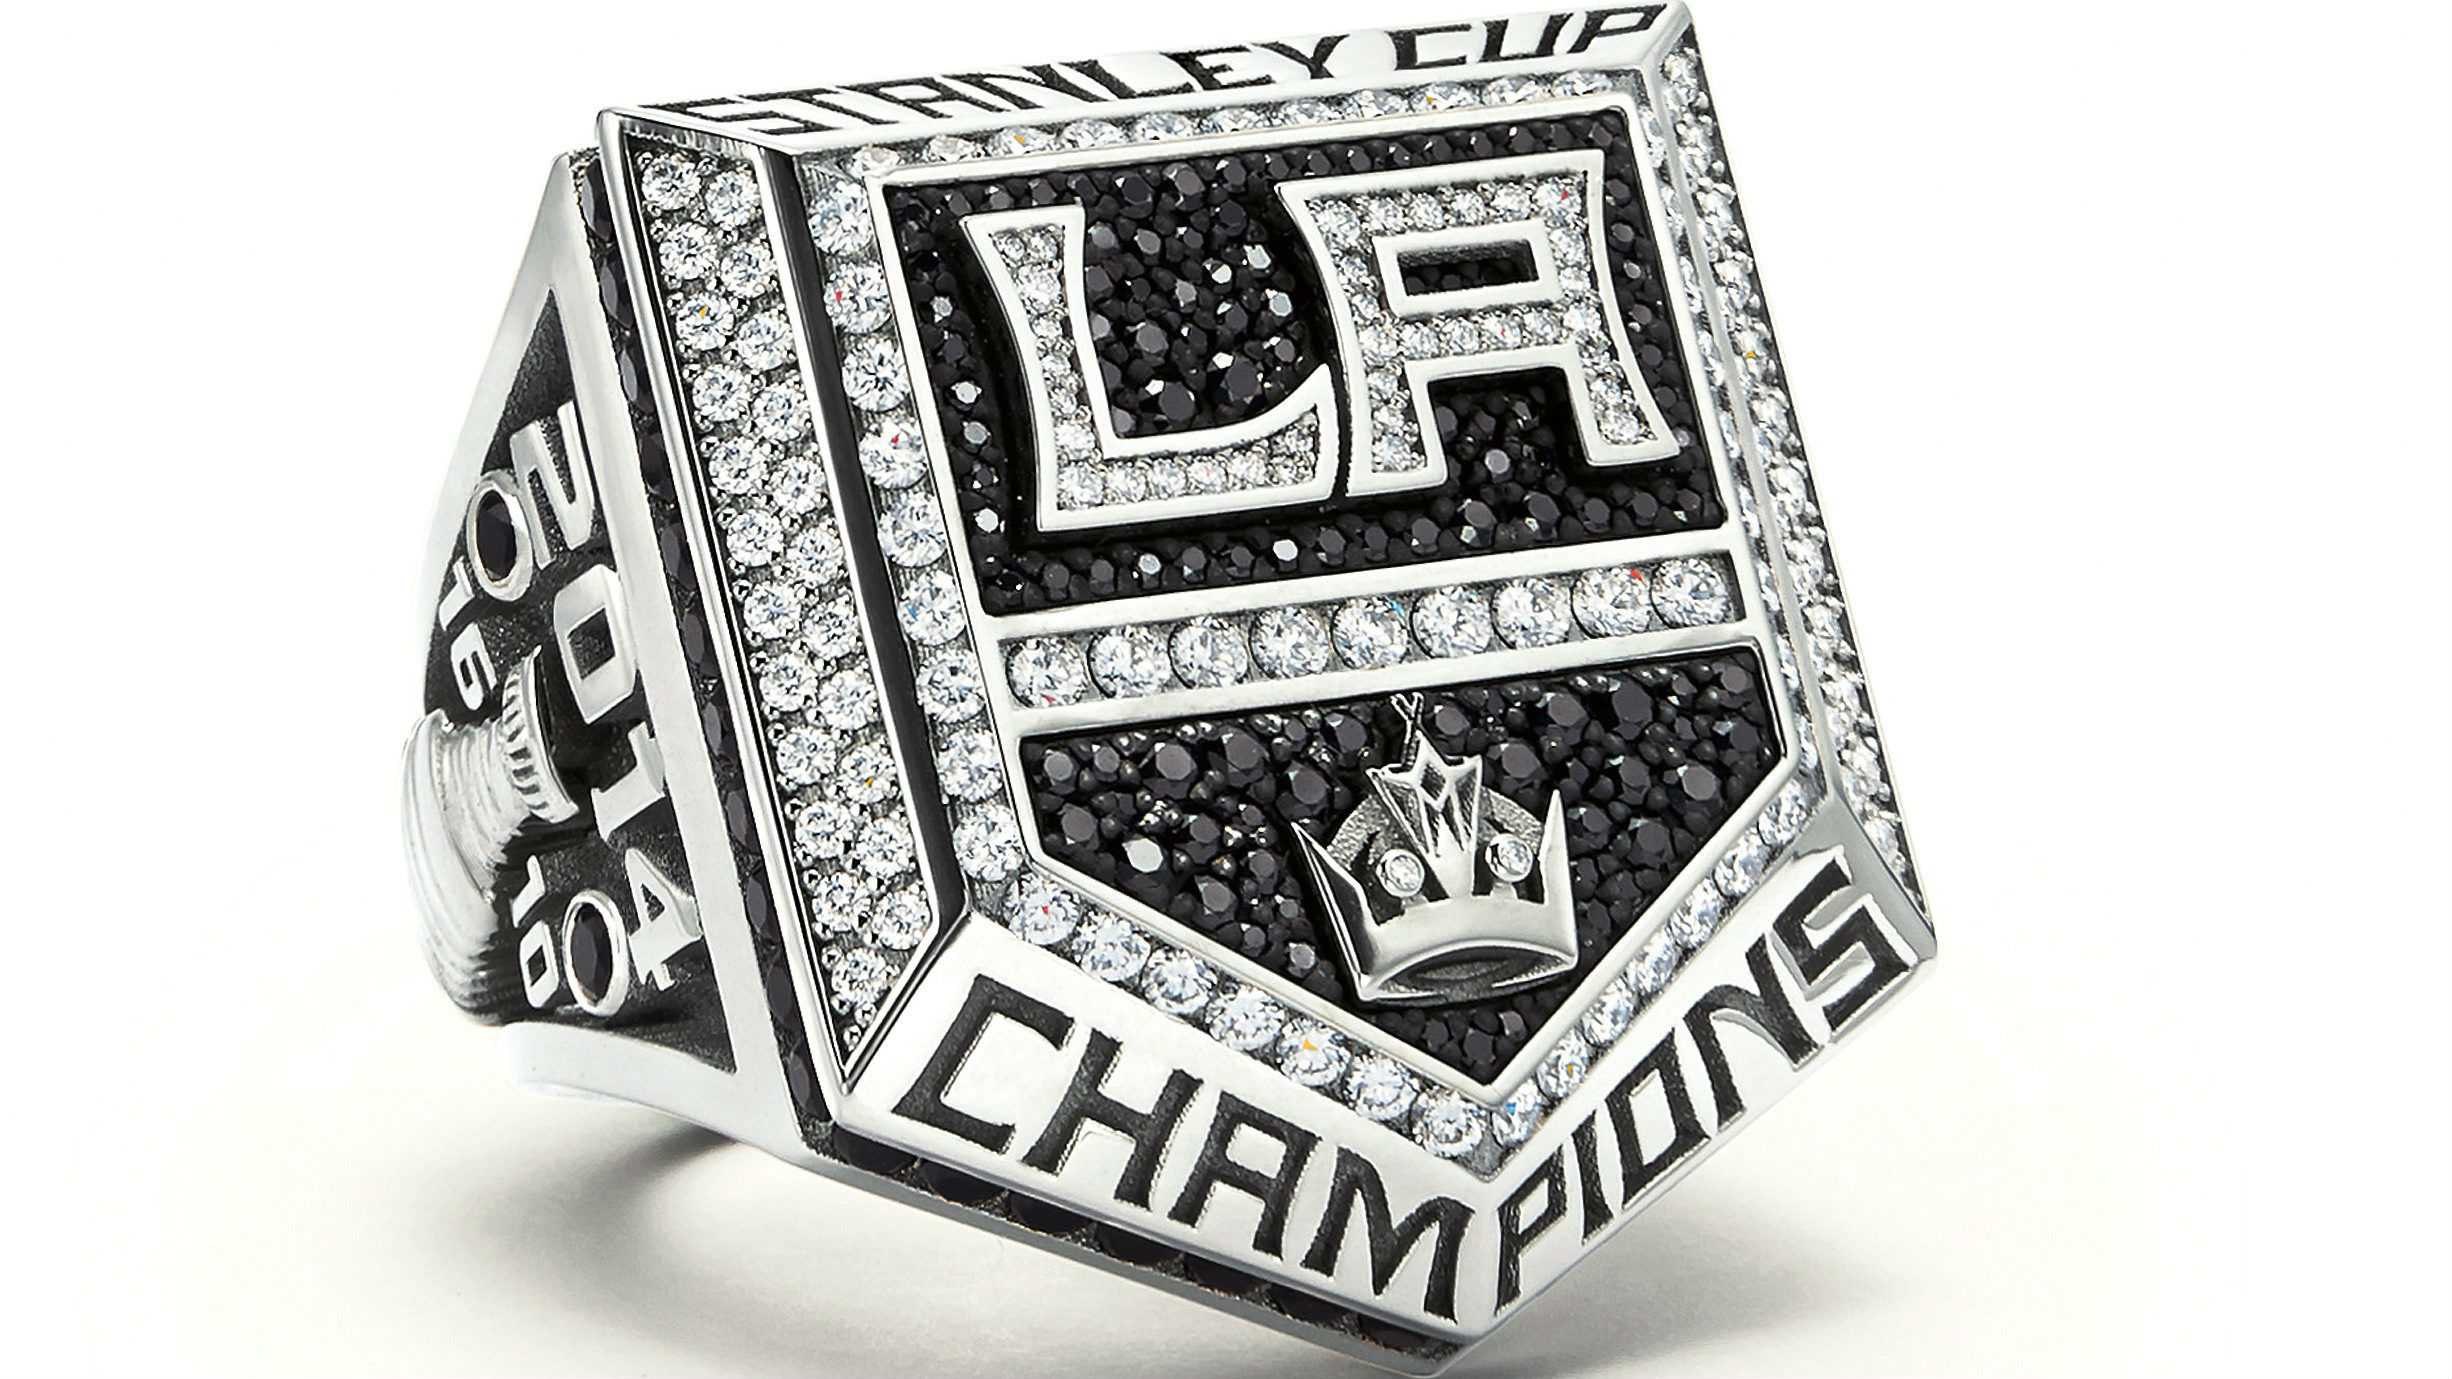 LA Kings Authentic Stanley Cup Championship Ring Up For Special Auction To  Benefit Children's Hospital Los Angeles